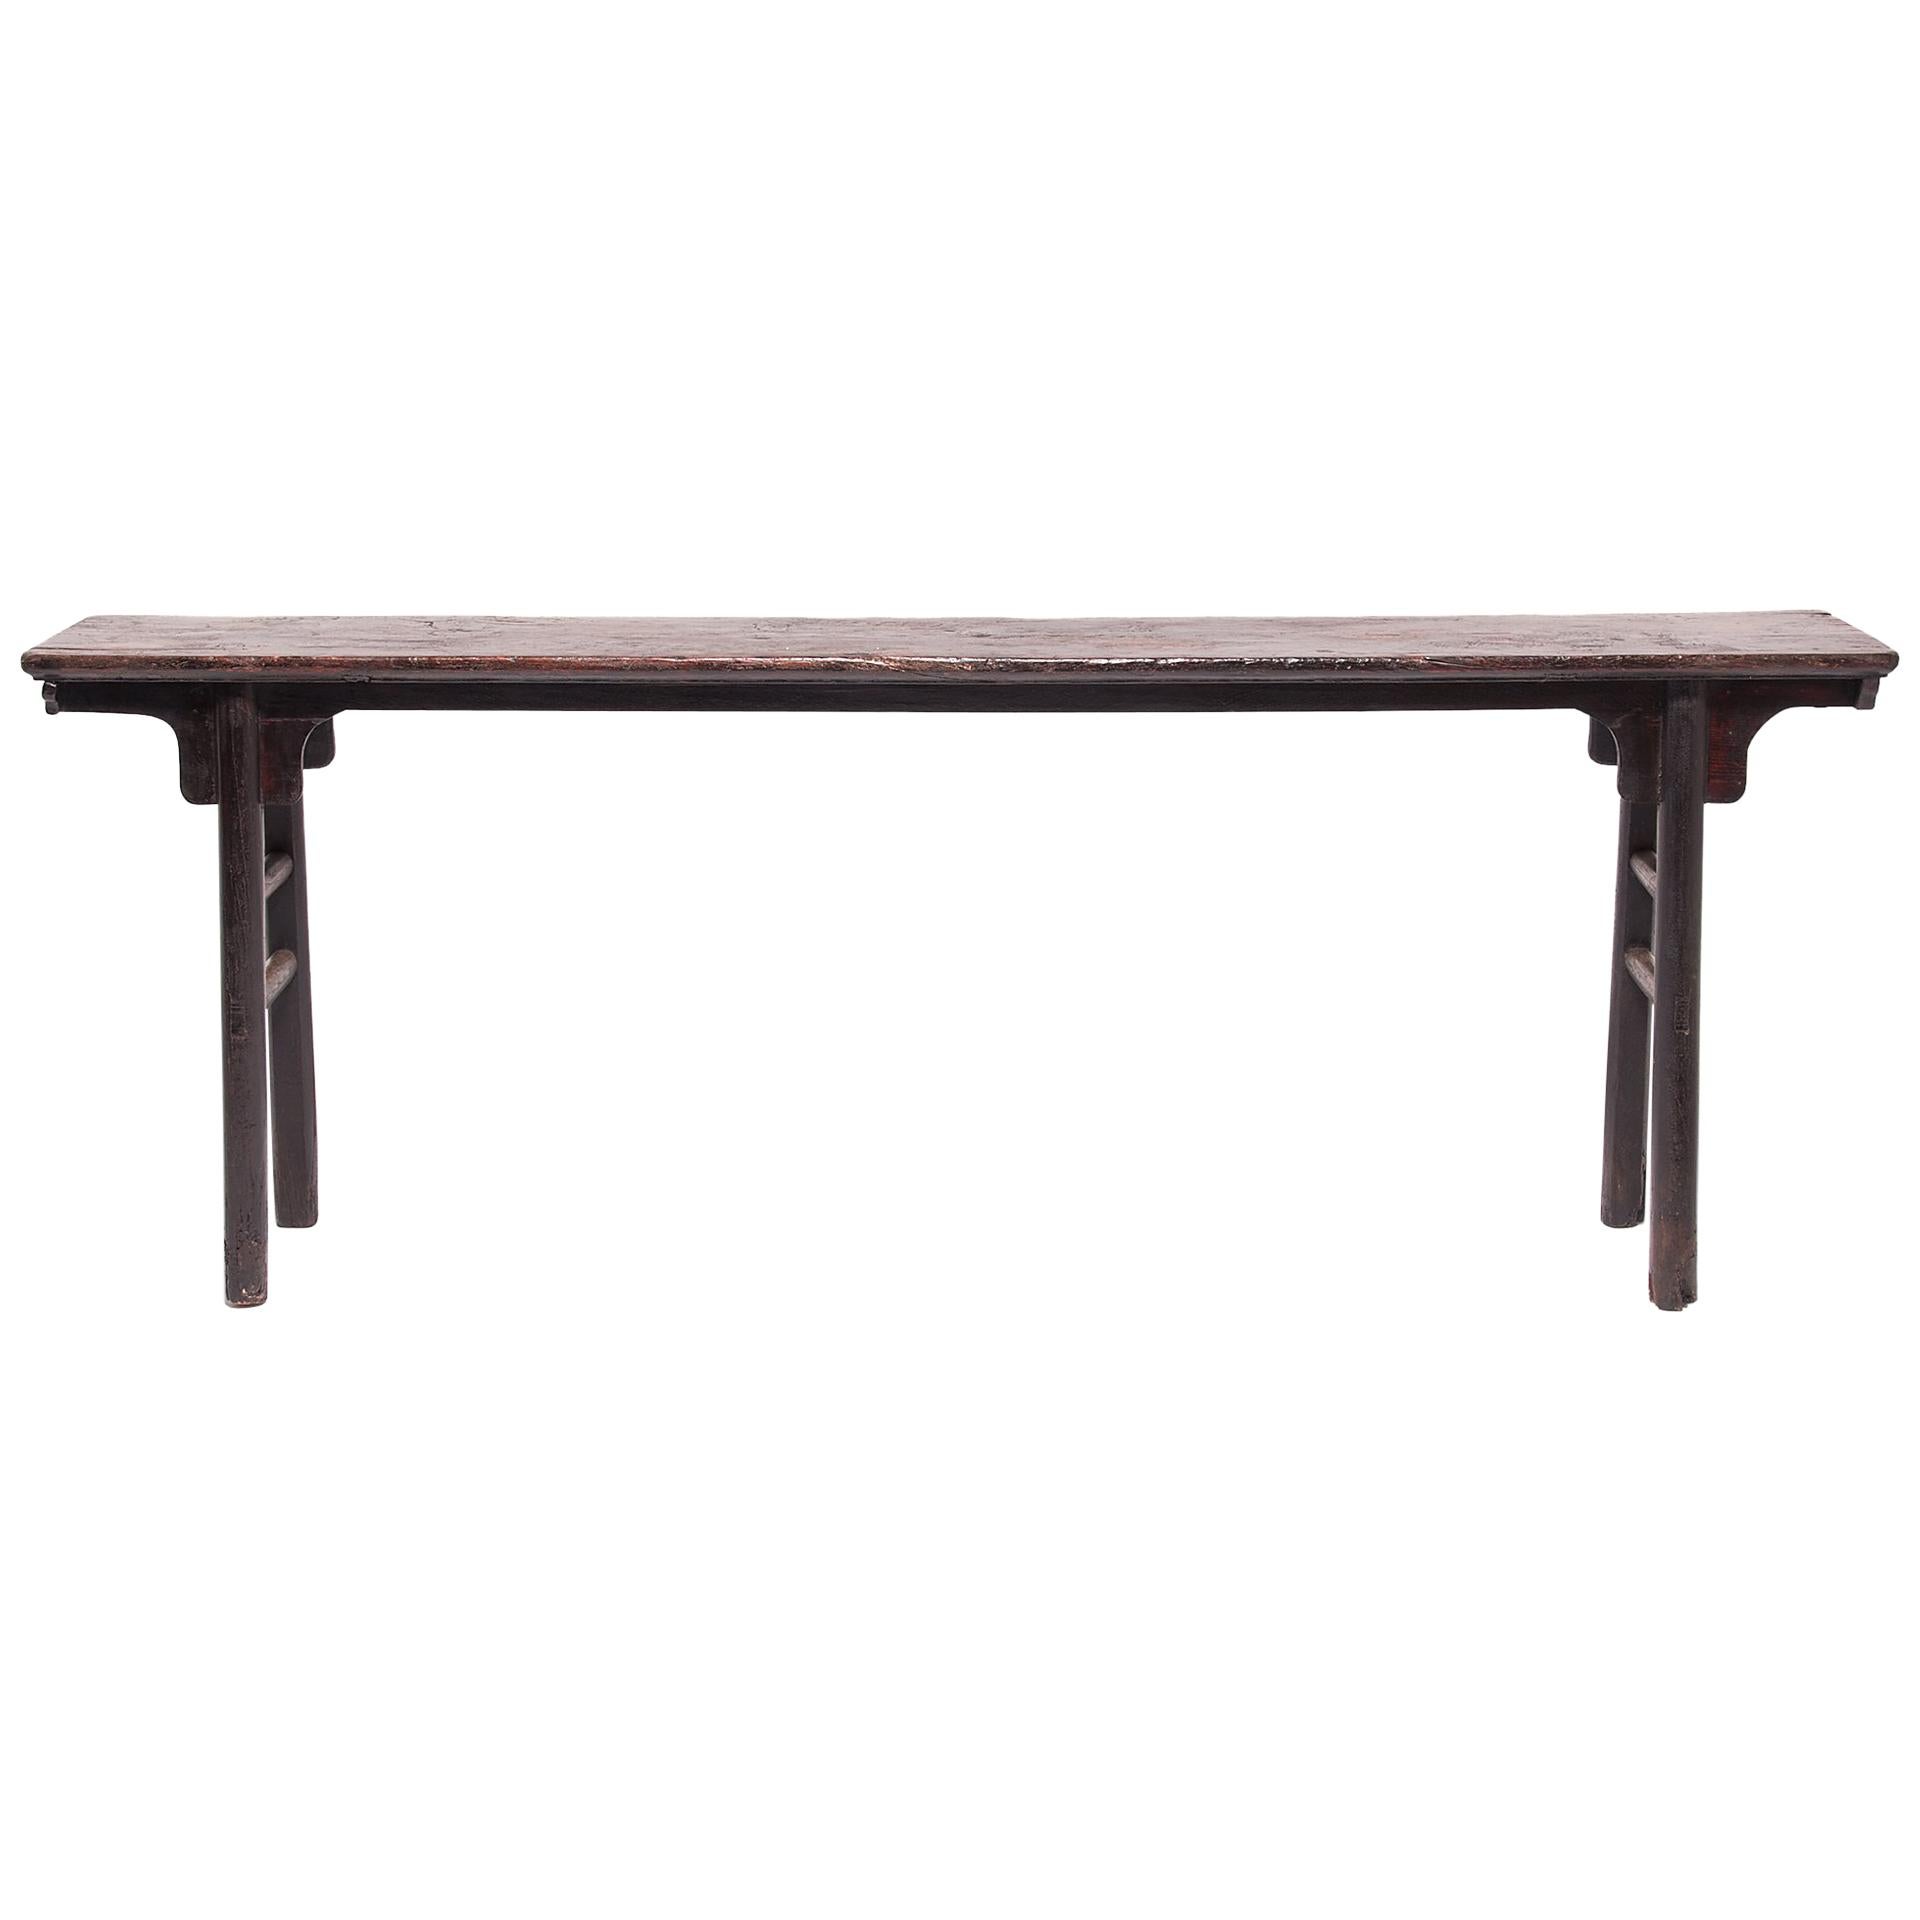 18th Century Ming Form Recessed Leg Table